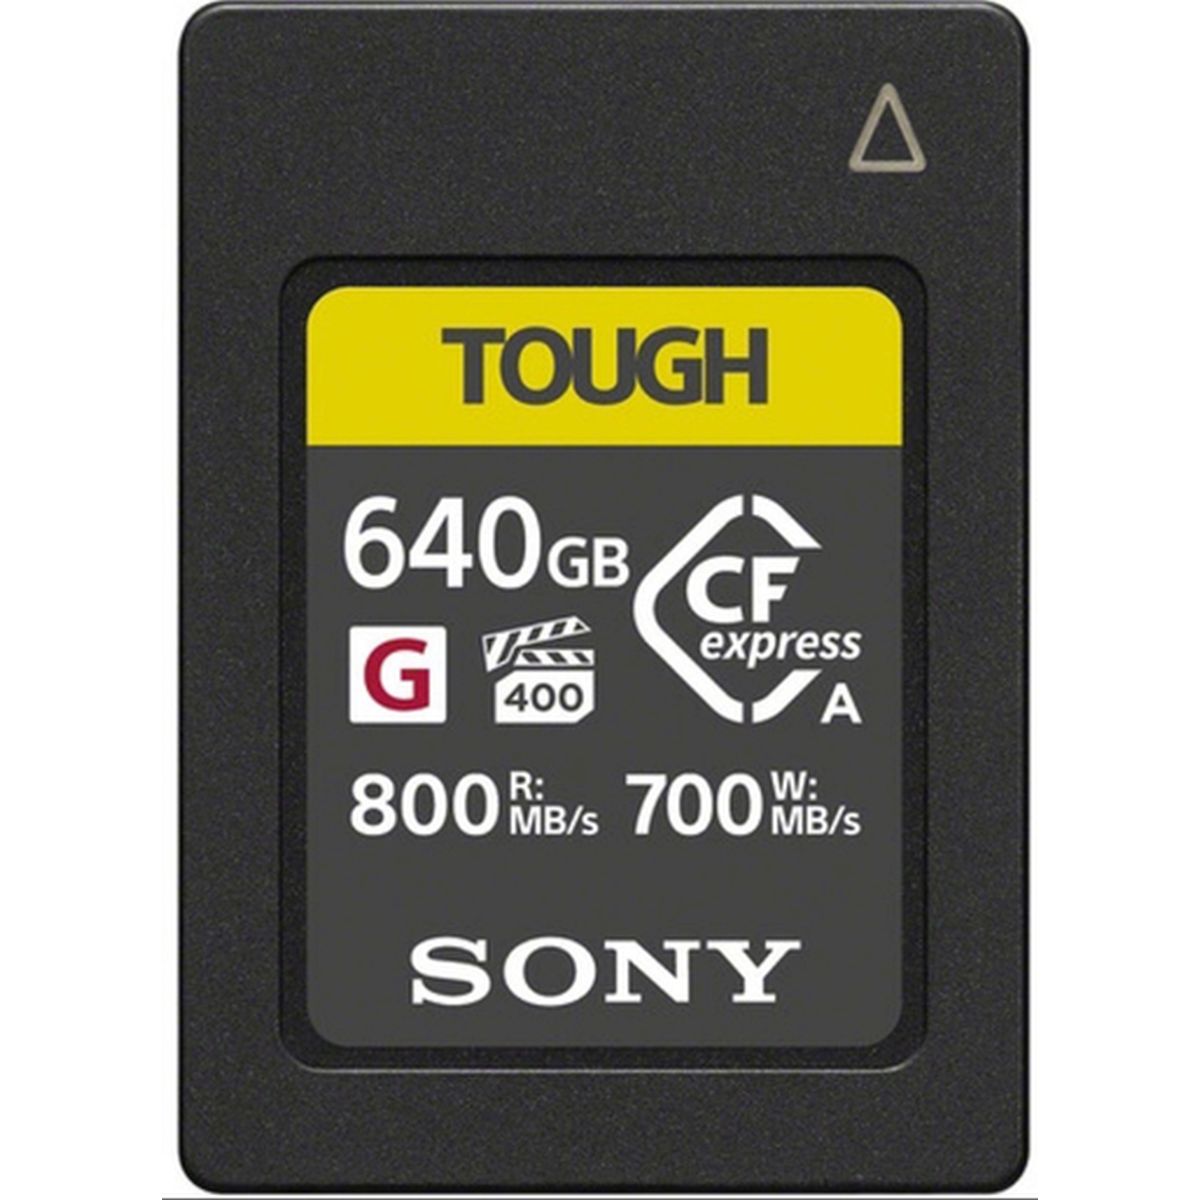 Sony CFexpress 640 GB Typ A (800/700 MB/s)